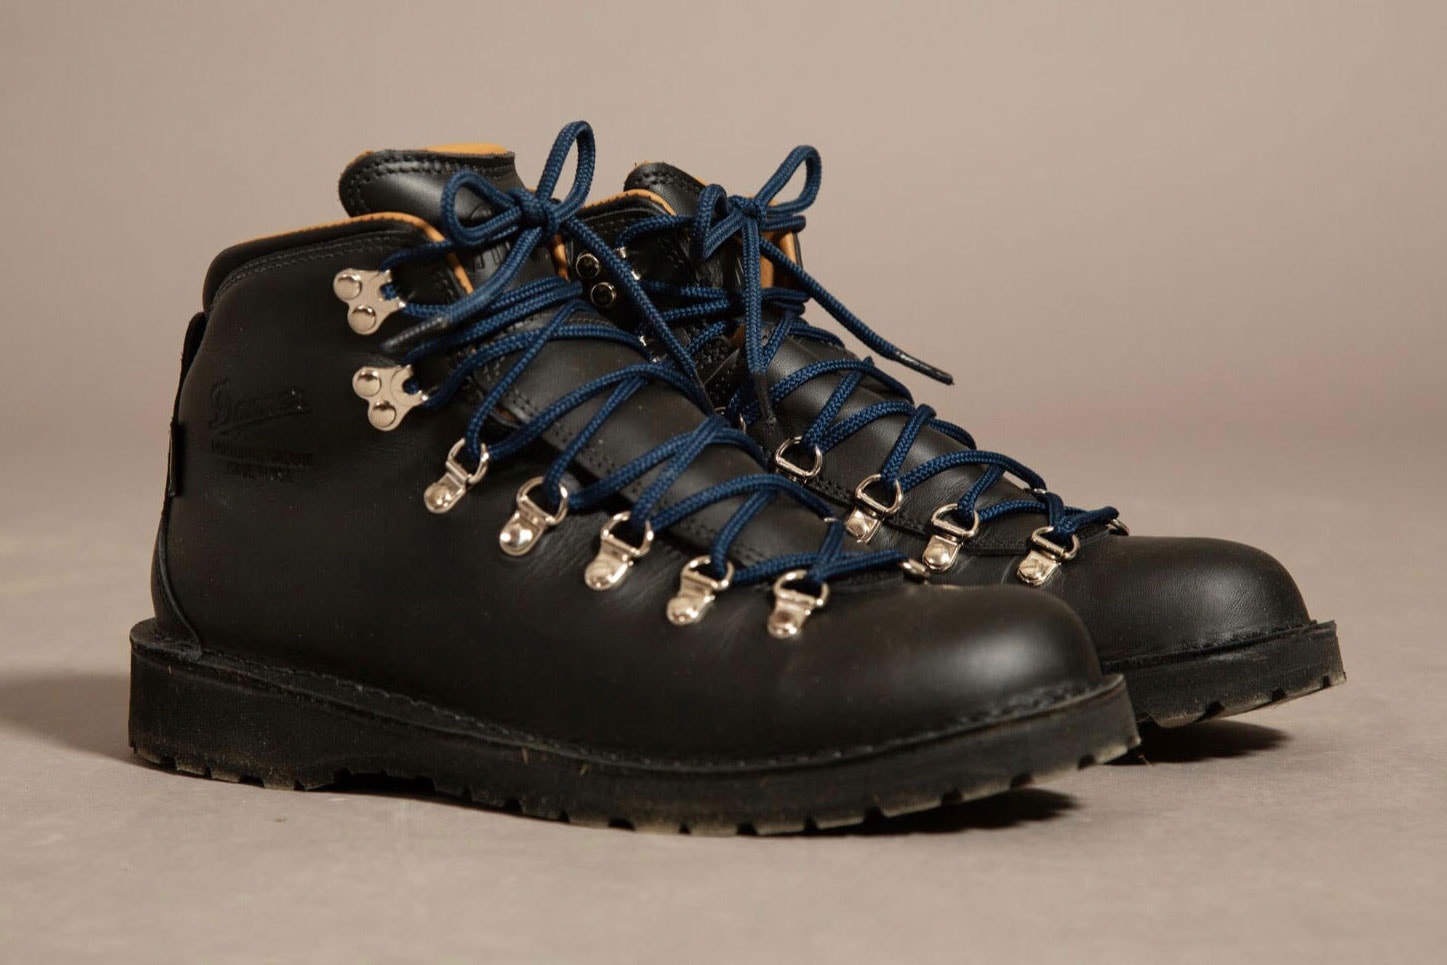 Danner x Westerlind Boot Collection Release Info